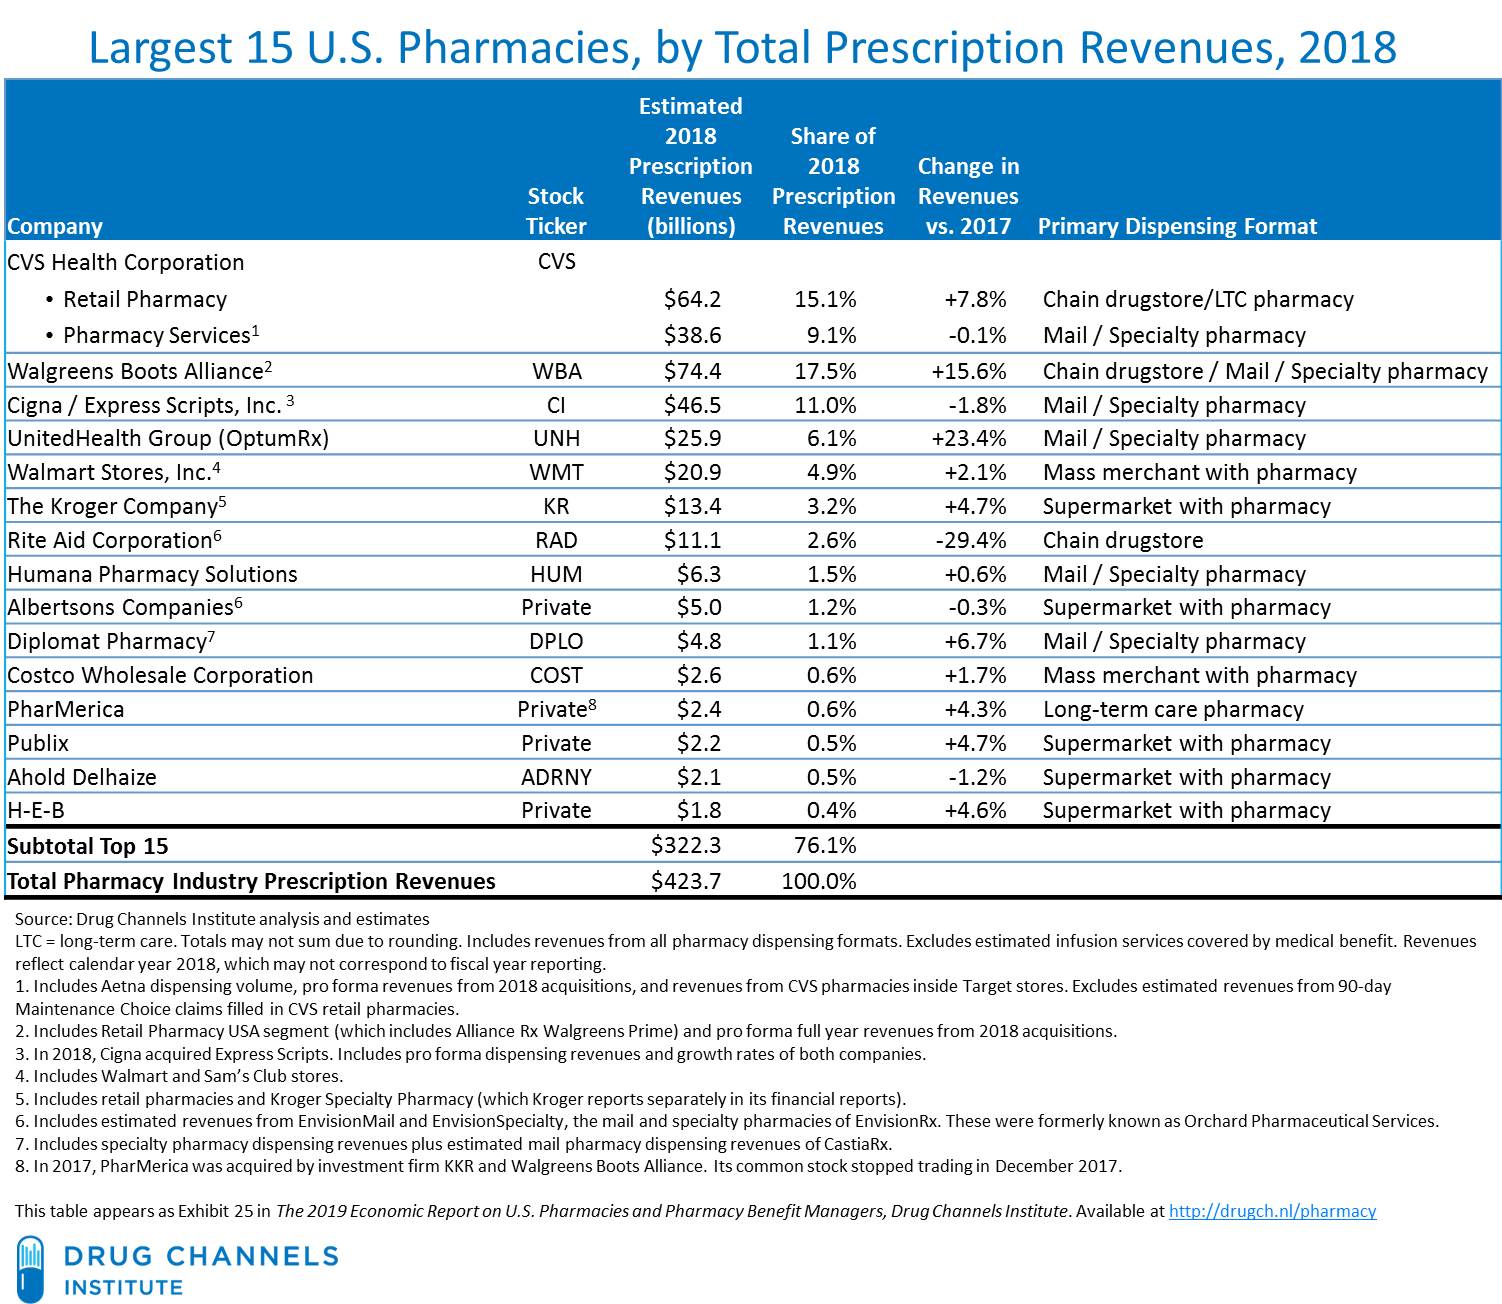 Drug Channels: The Top 15 U.S. Pharmacies of 2018: M&A Reshapes the Market